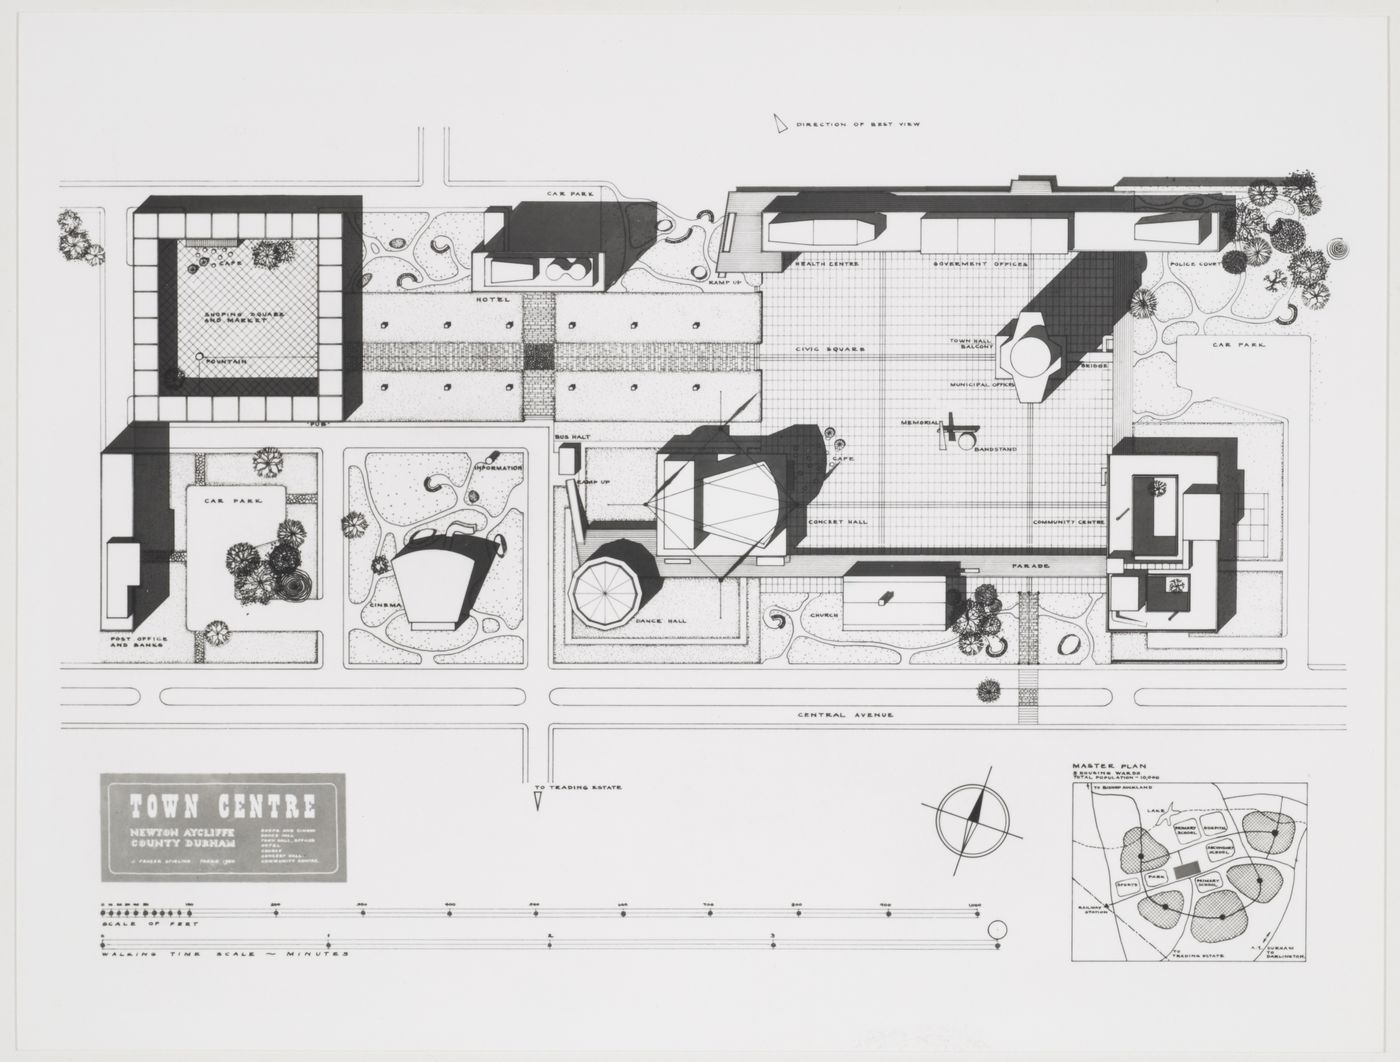 Photograph of the Plan of Town Centre and Community Centre, Newton Aycliffe, England (thesis, Liverpool School of Architecture)
